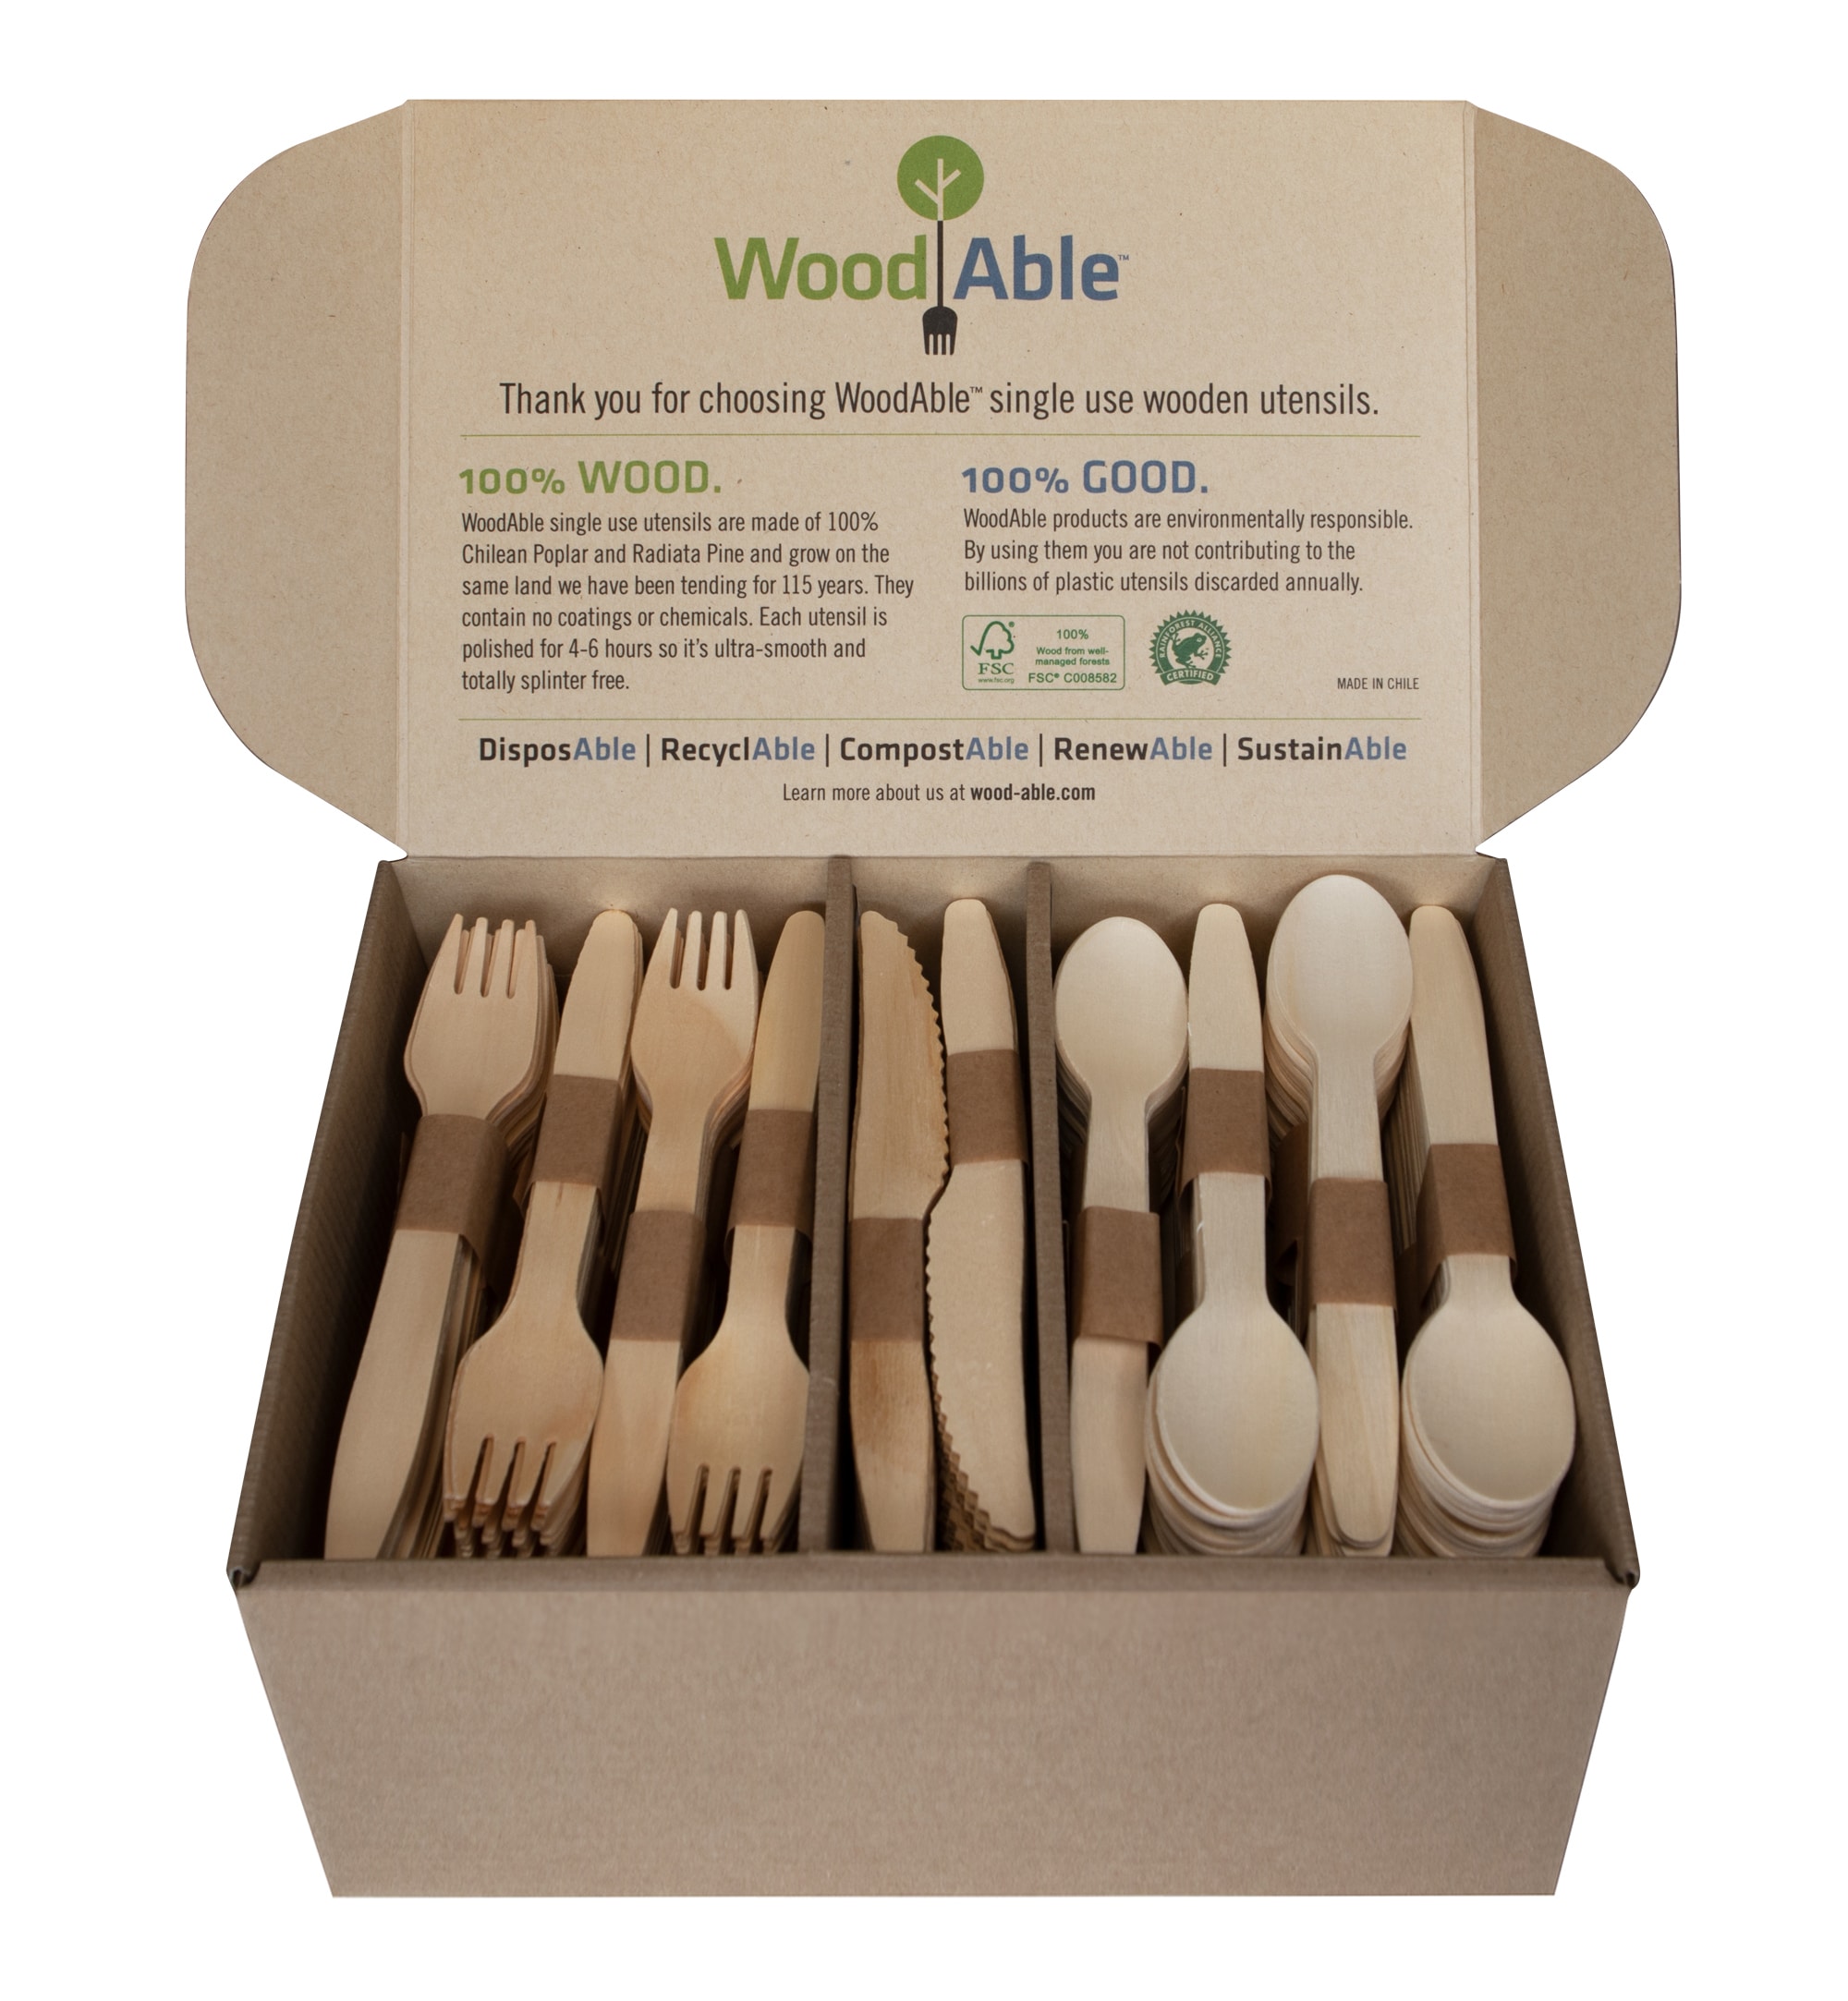 Cutlery Gift Sets - Most Popular Gift Sets